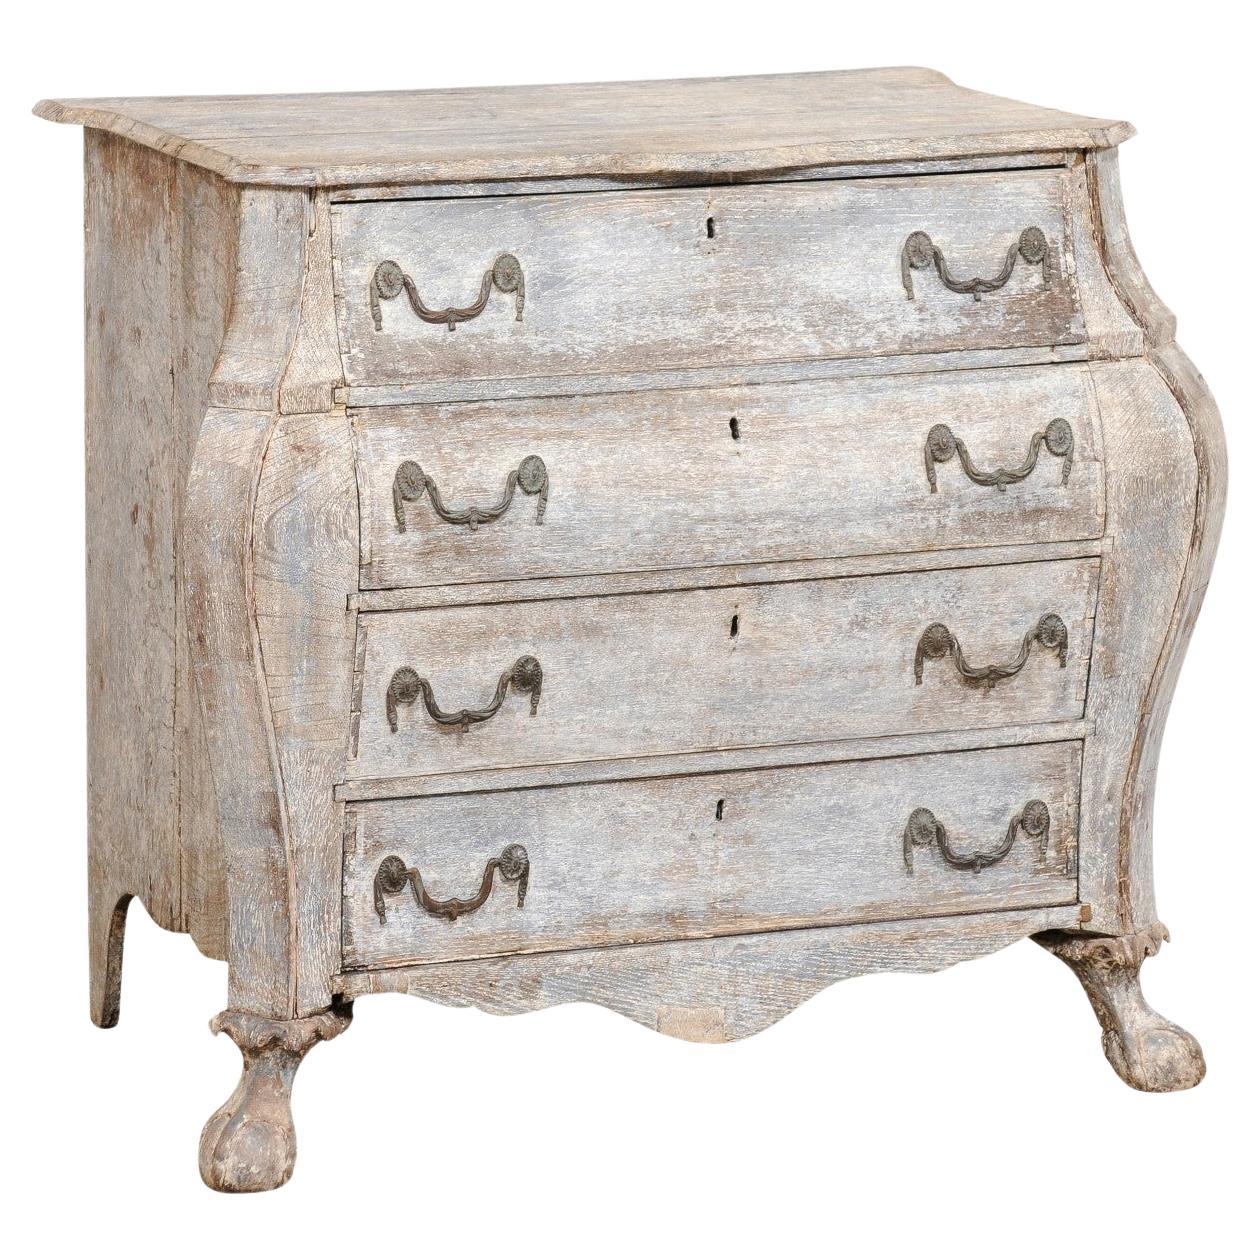 French Late 18th C. Curvy Bombé Front Chest w/Fabulous Paw Feet w/"Fur" Ankles For Sale